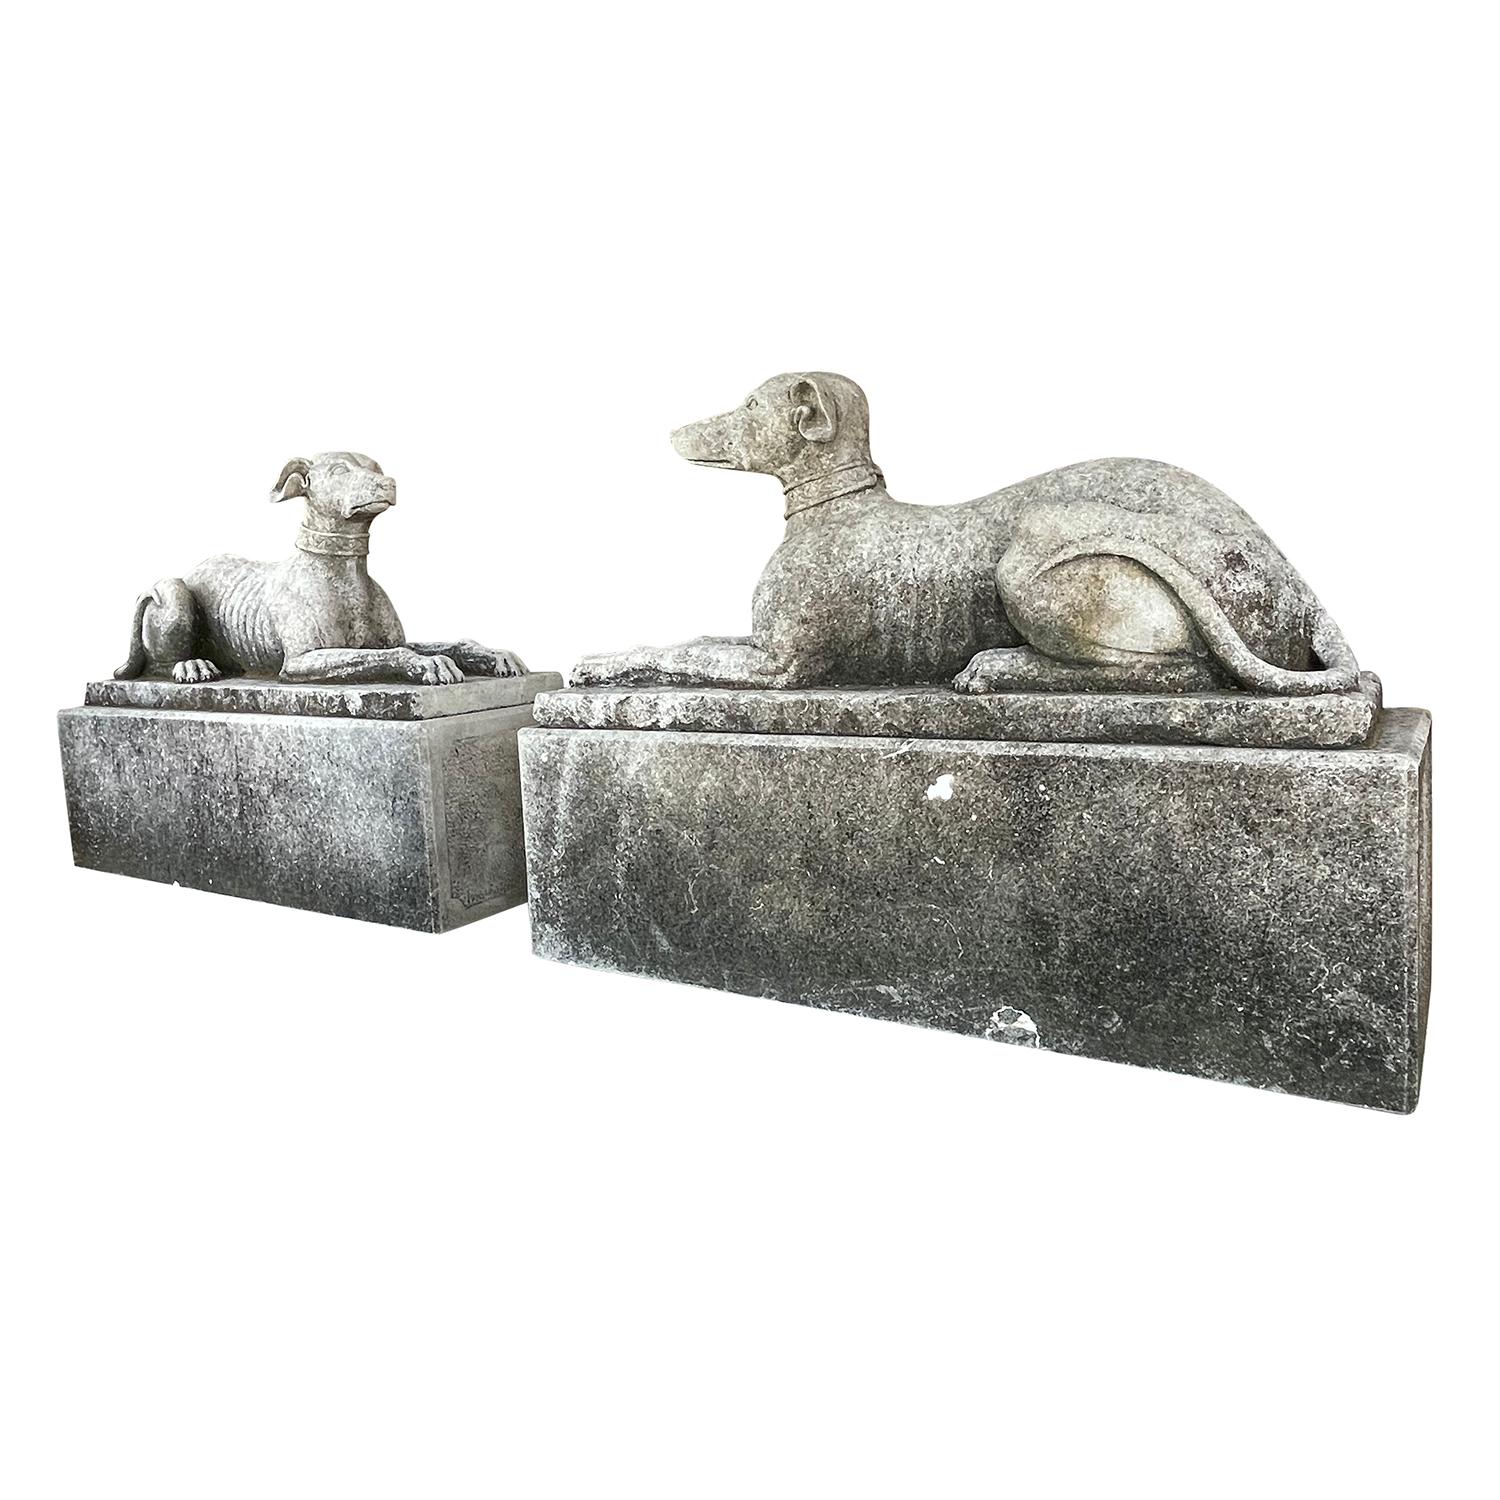 A pair of hand carved limestone English whippets or greyhounds like. The antique garden statues have raised heads, and in an alert extended position. These vintage stone dogs have fine detailed carvings and are in good condition. They are positioned